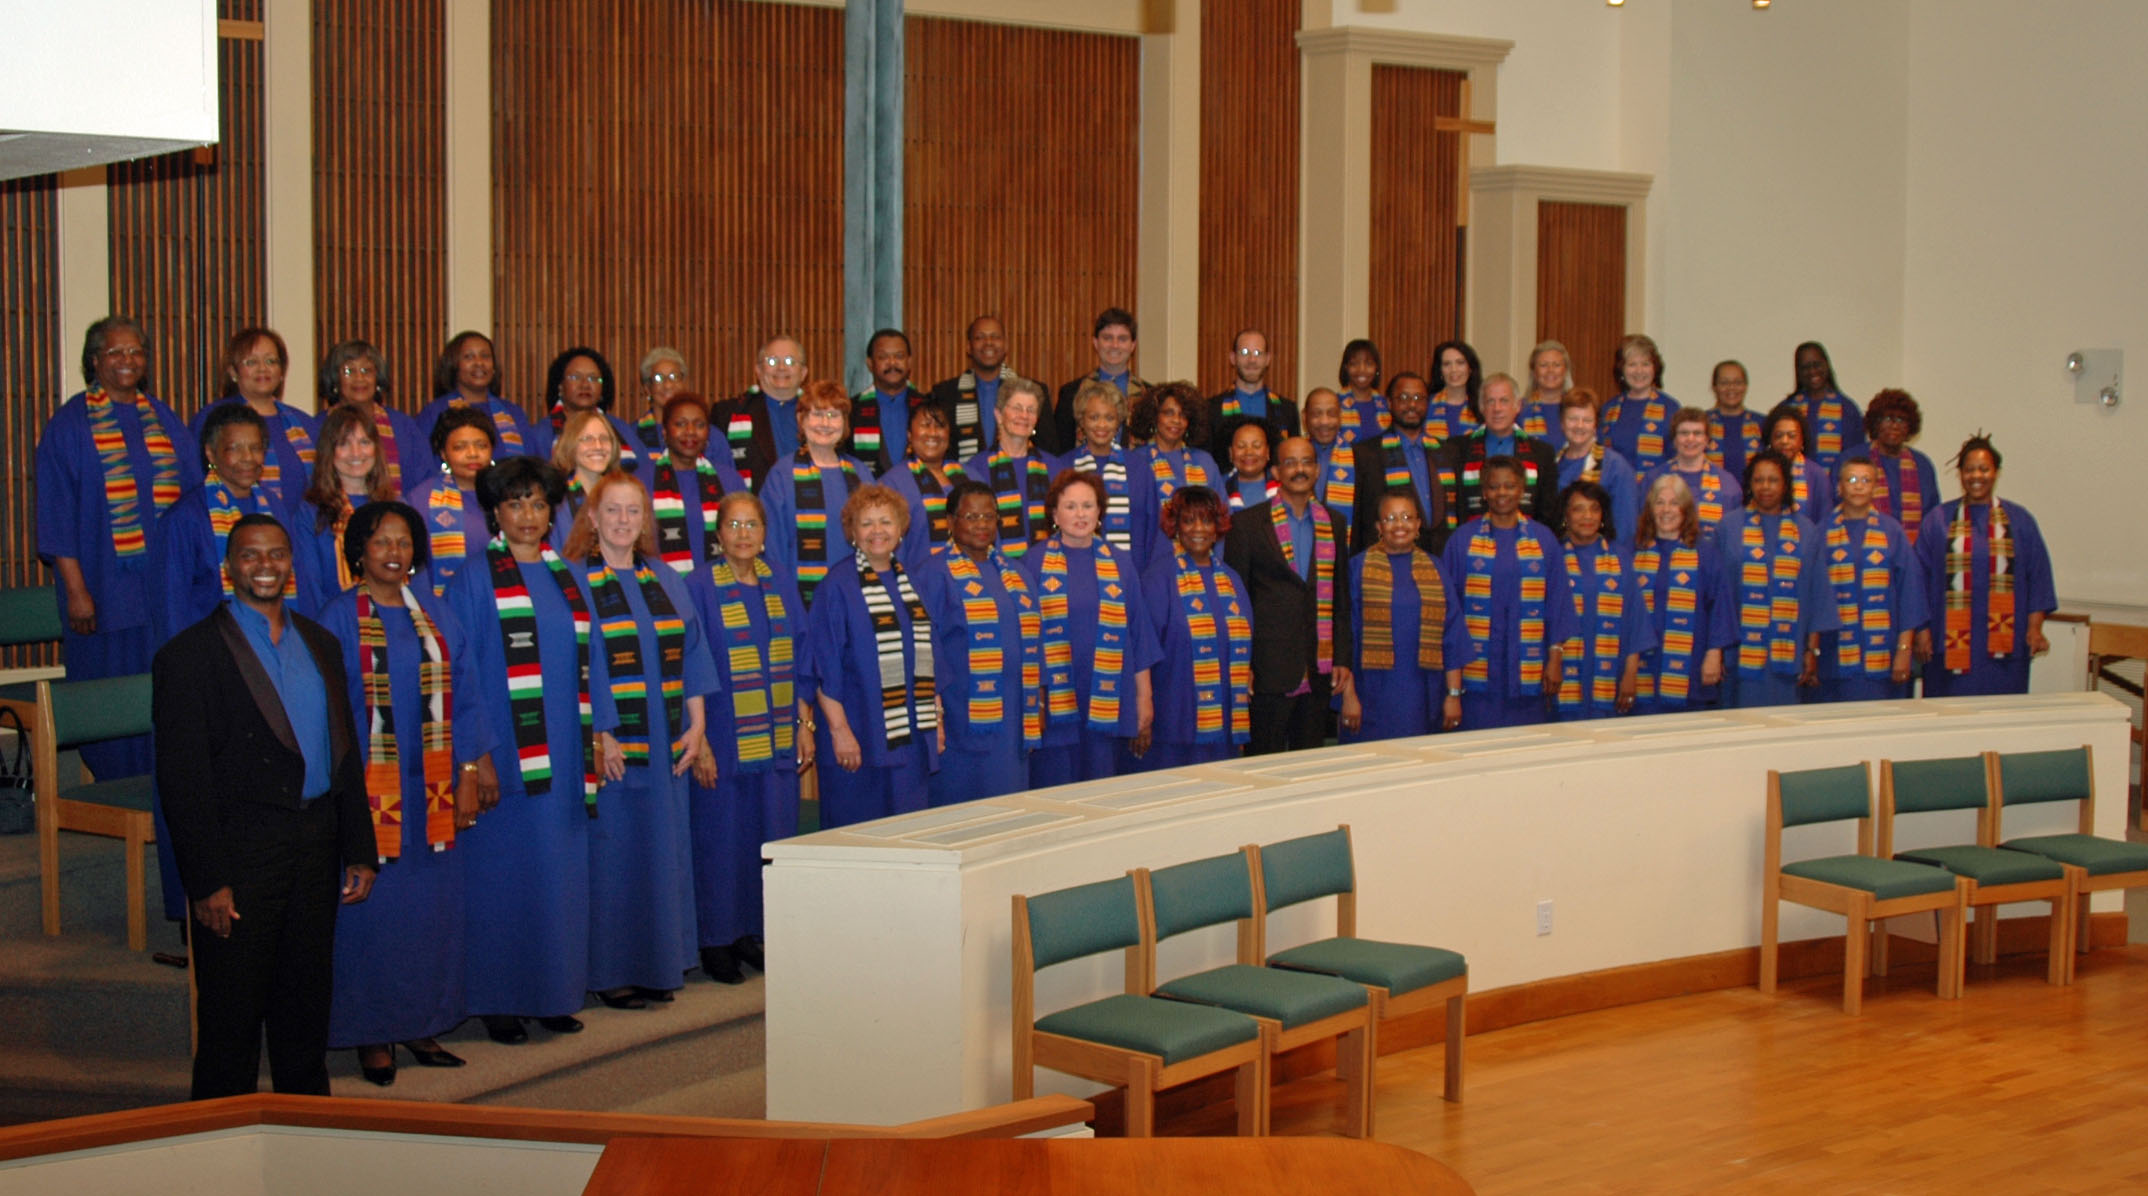 Members of the Martin Luther King Community Choir, with Director Ken Anderson